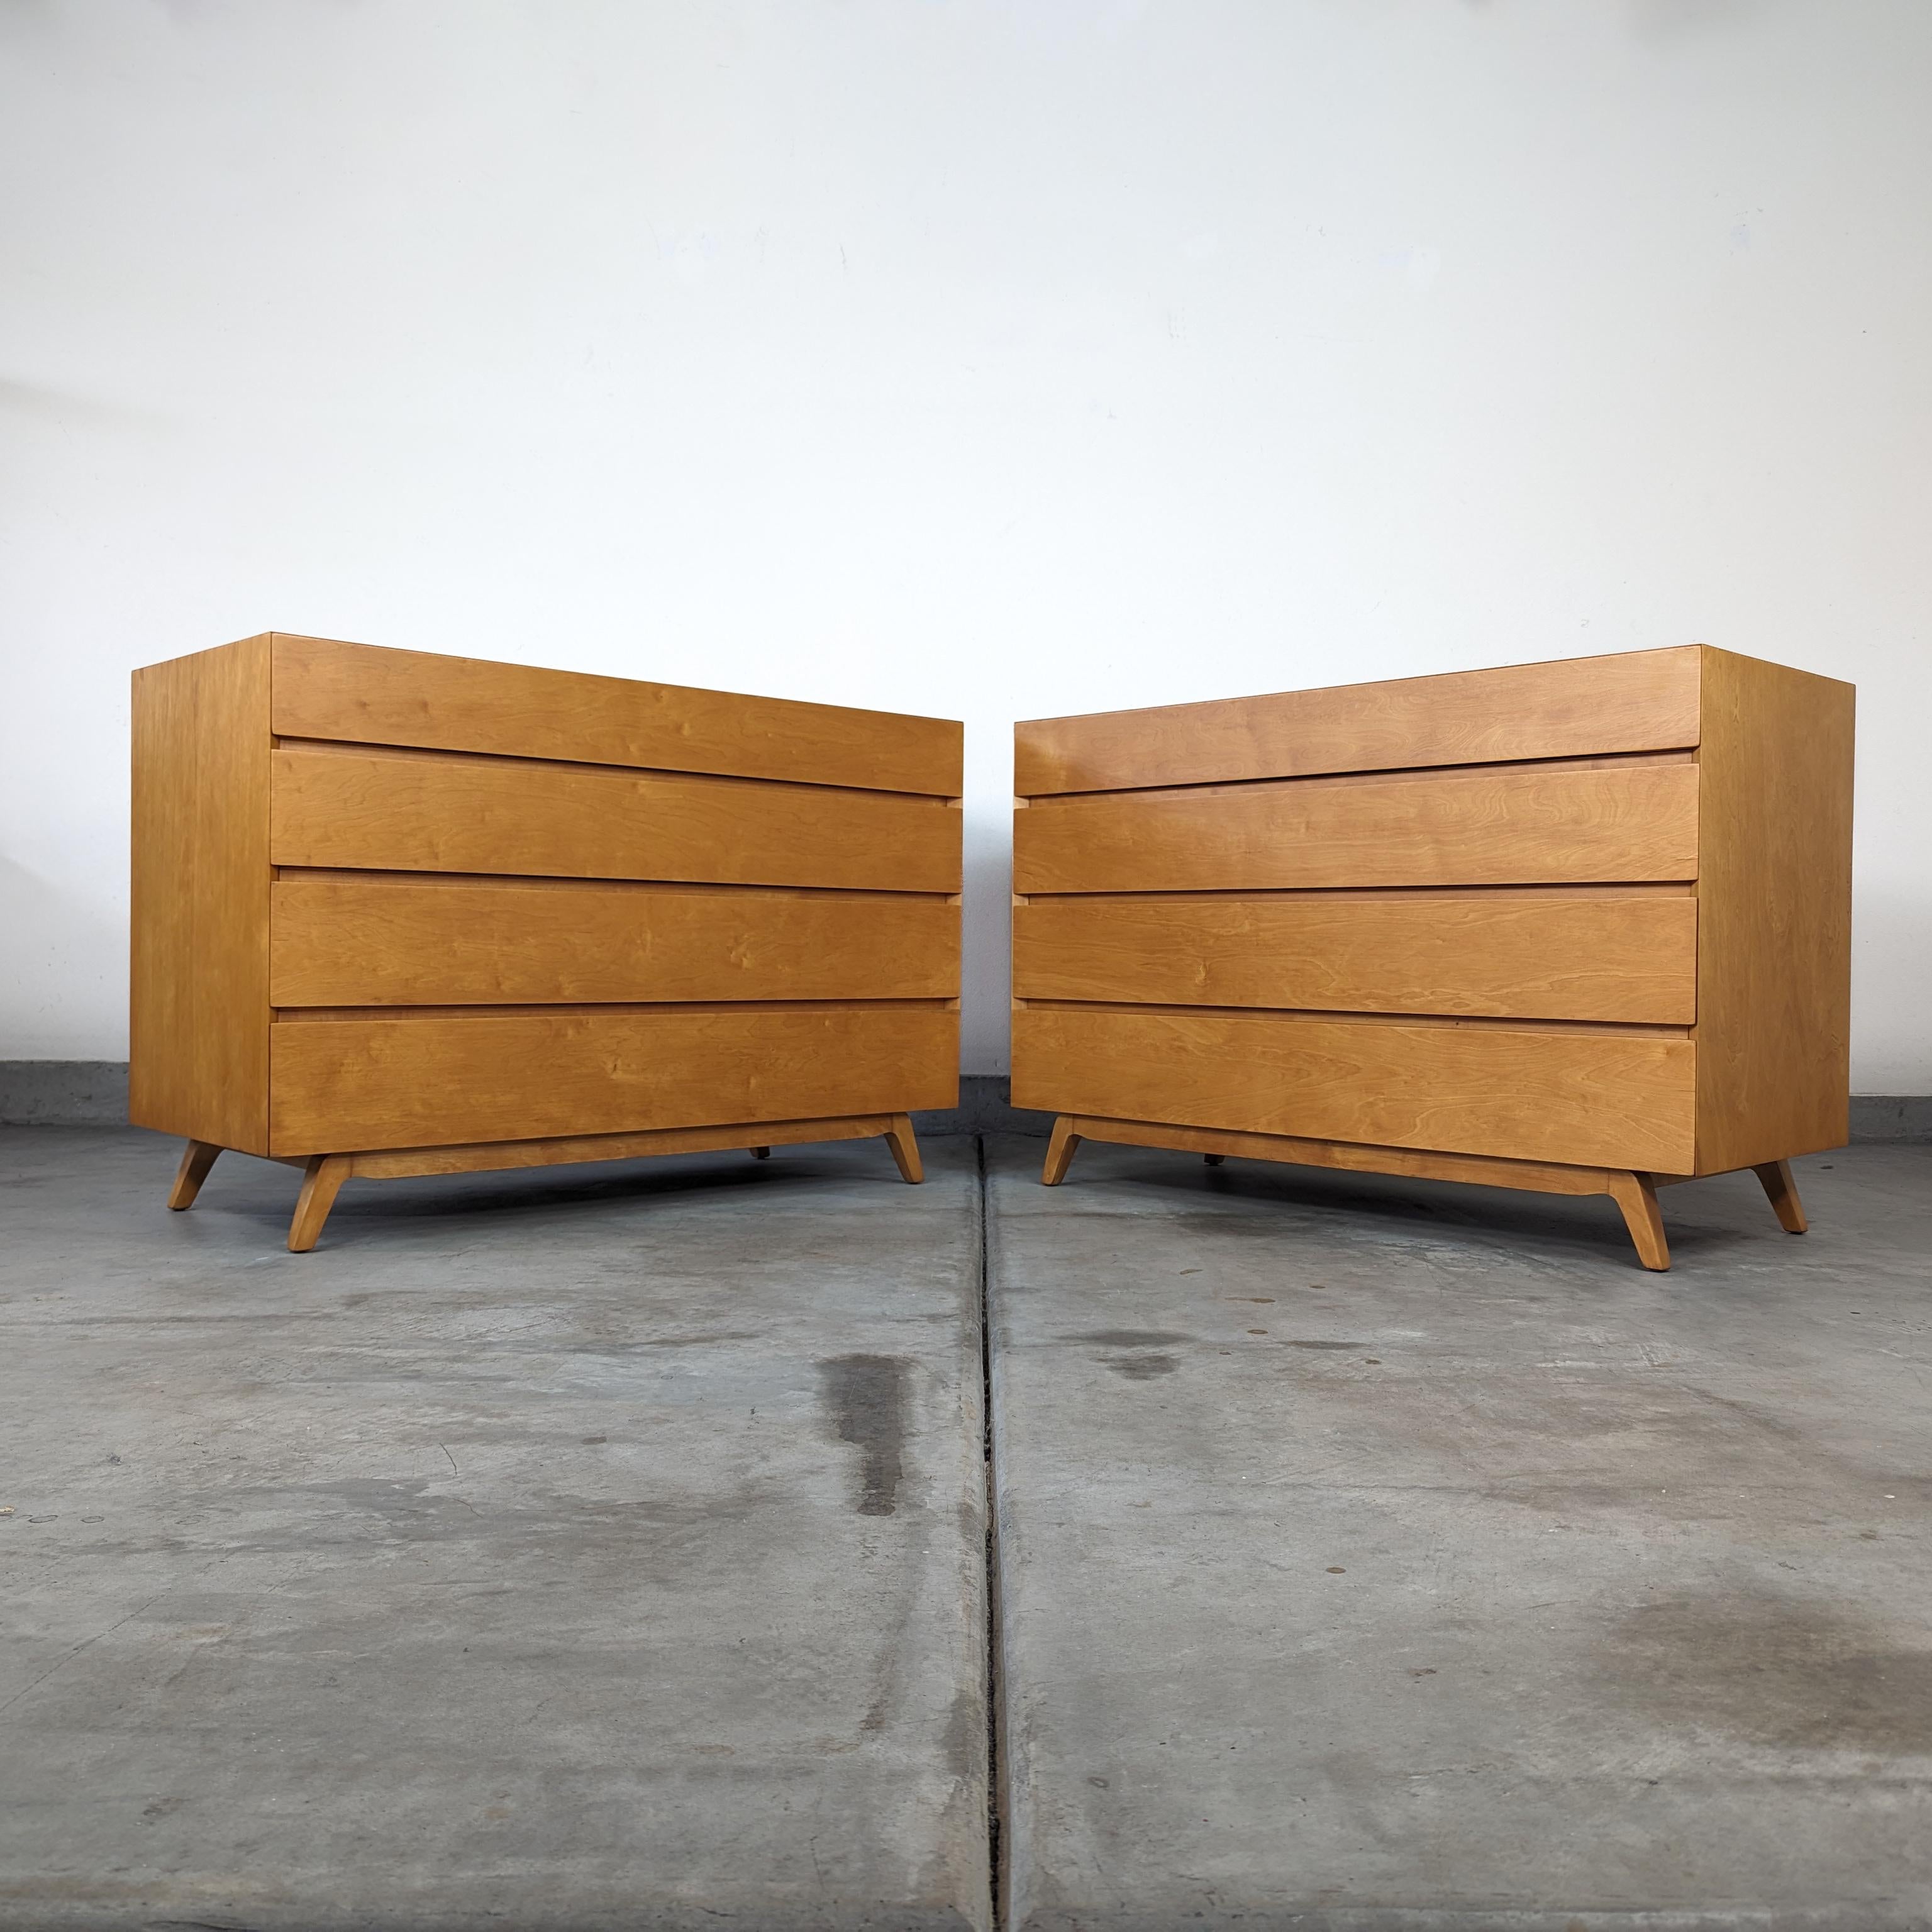 Embrace the timeless elegance and functional beauty of Mid-Century Modern design with this exquisite pair of maple chest of drawers, crafted by the renowned designer Edmond Spence in the 1950s. Each dresser, measuring an ample 46 inches in width, 20